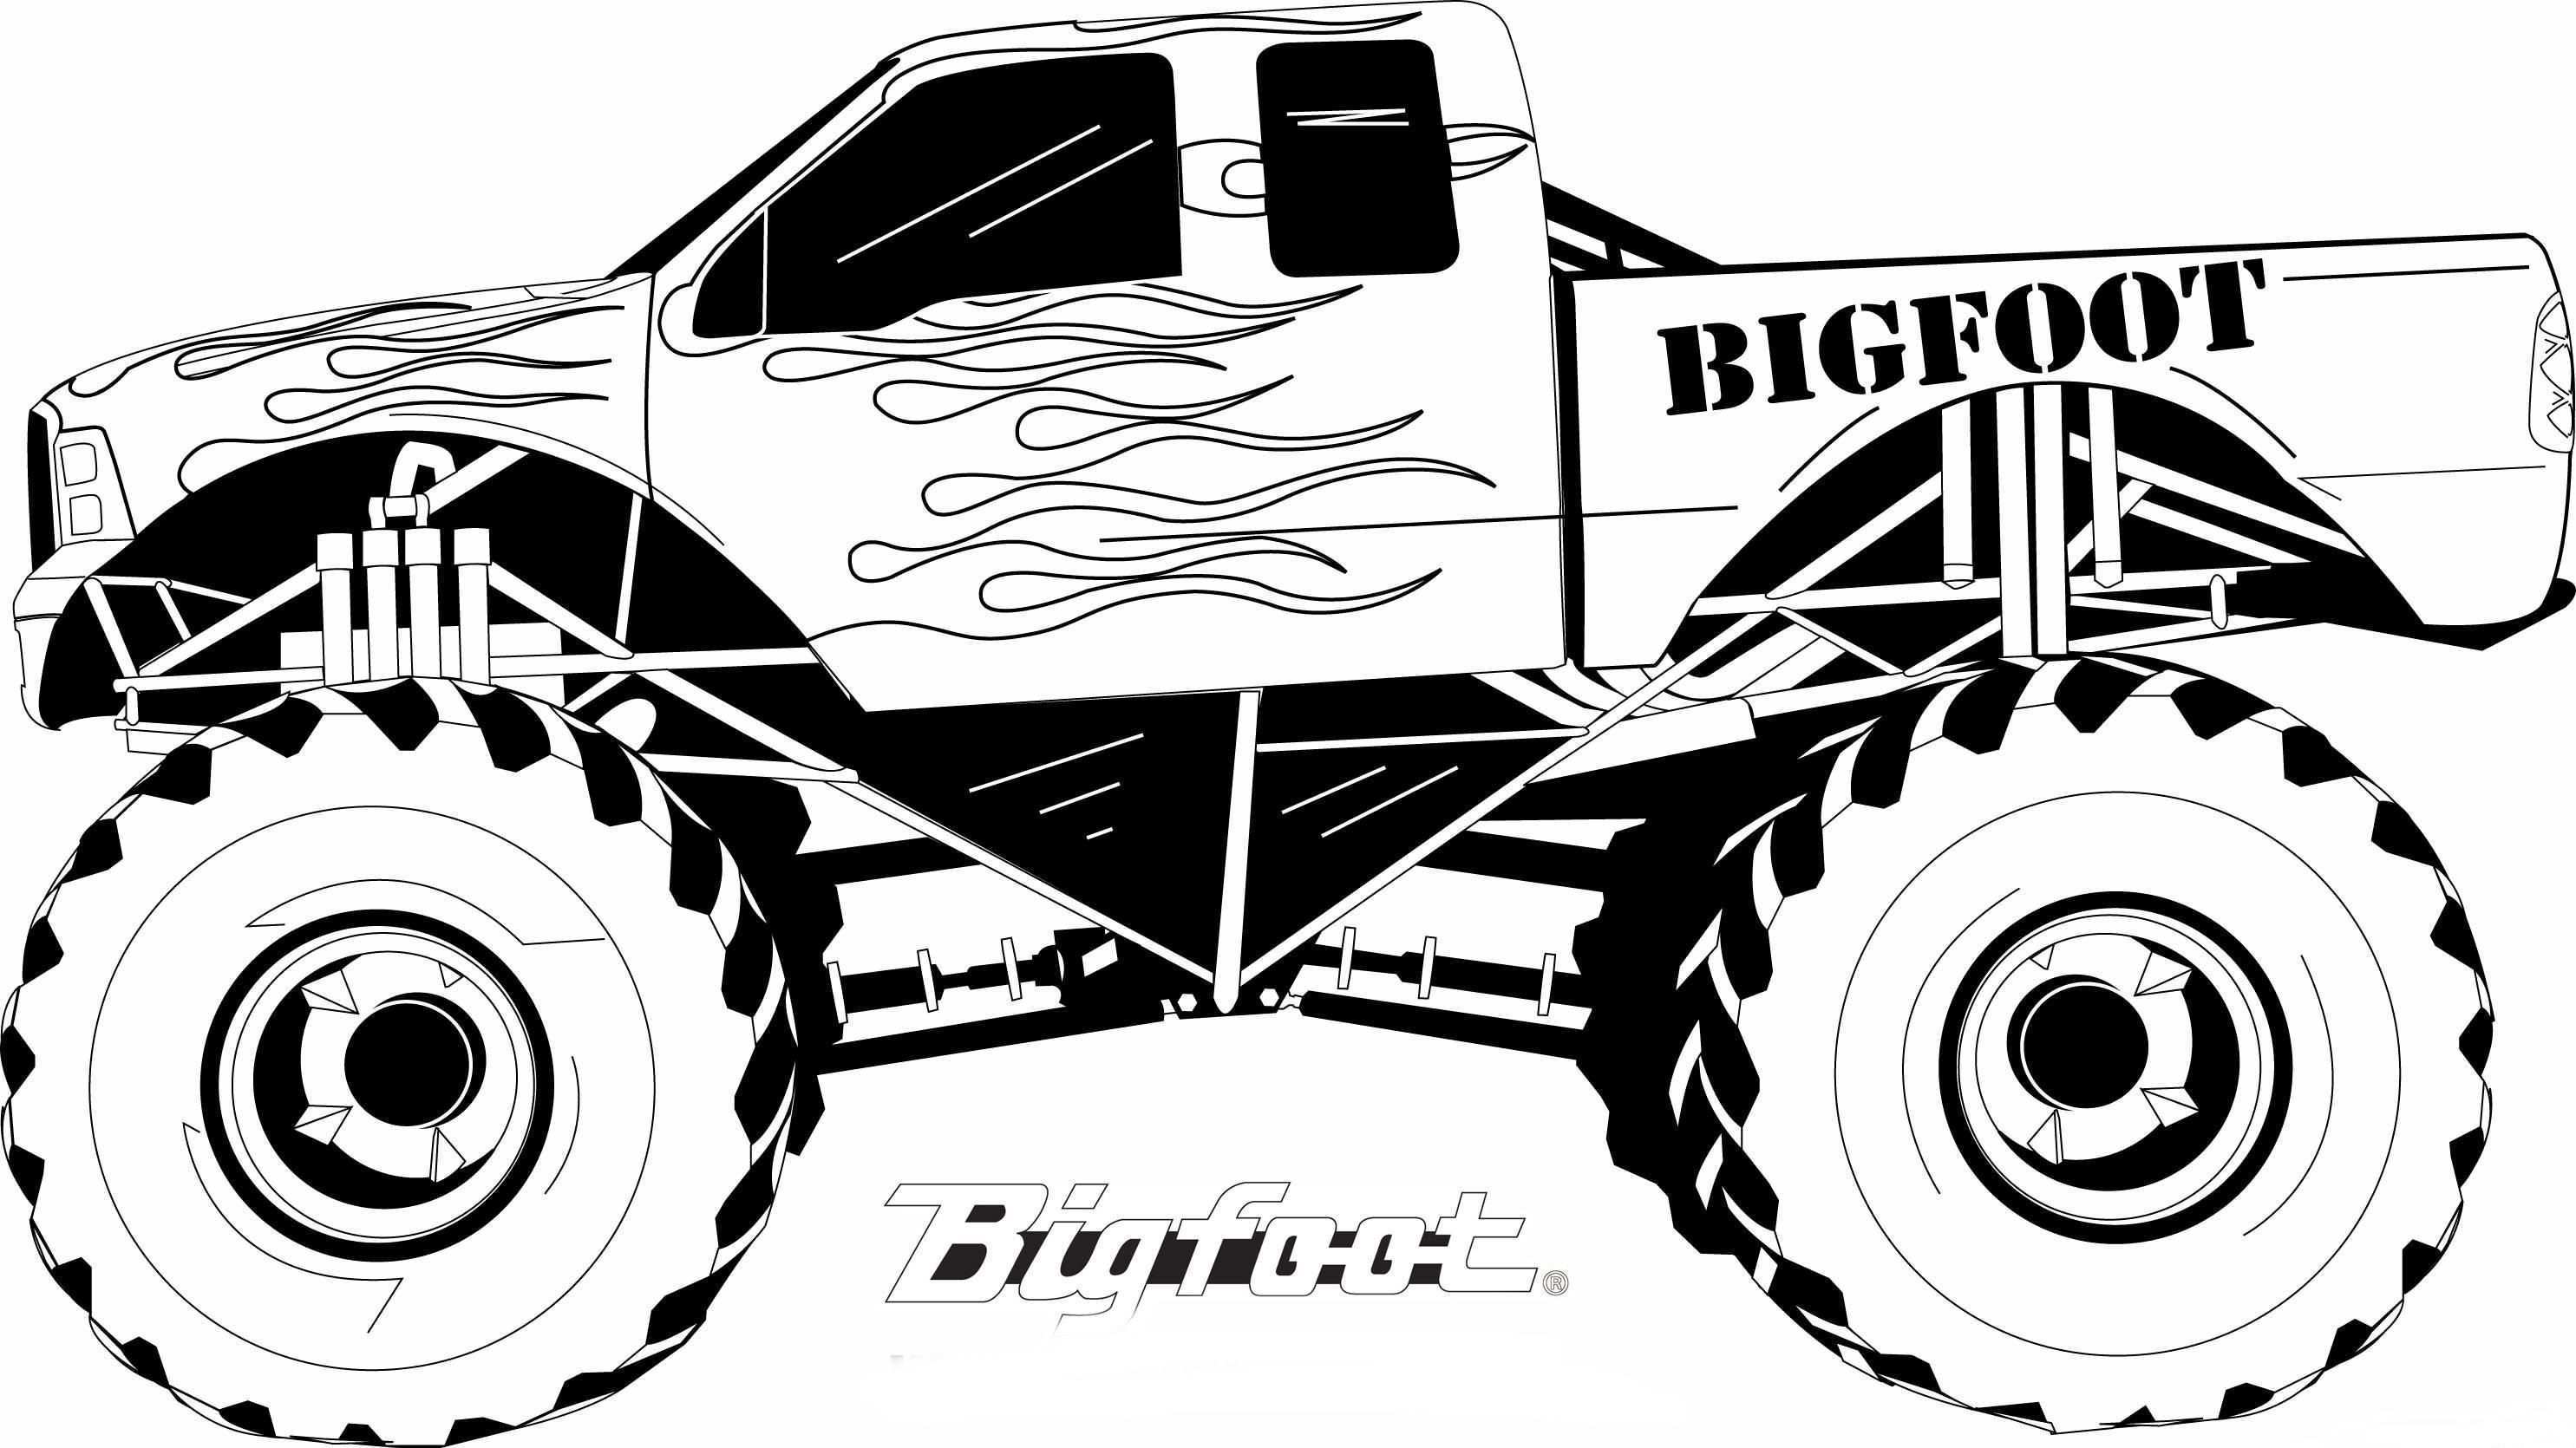 Famous Monster Truck Bigfoot Coloring Page Free Coloring Pages Online Famous Monster